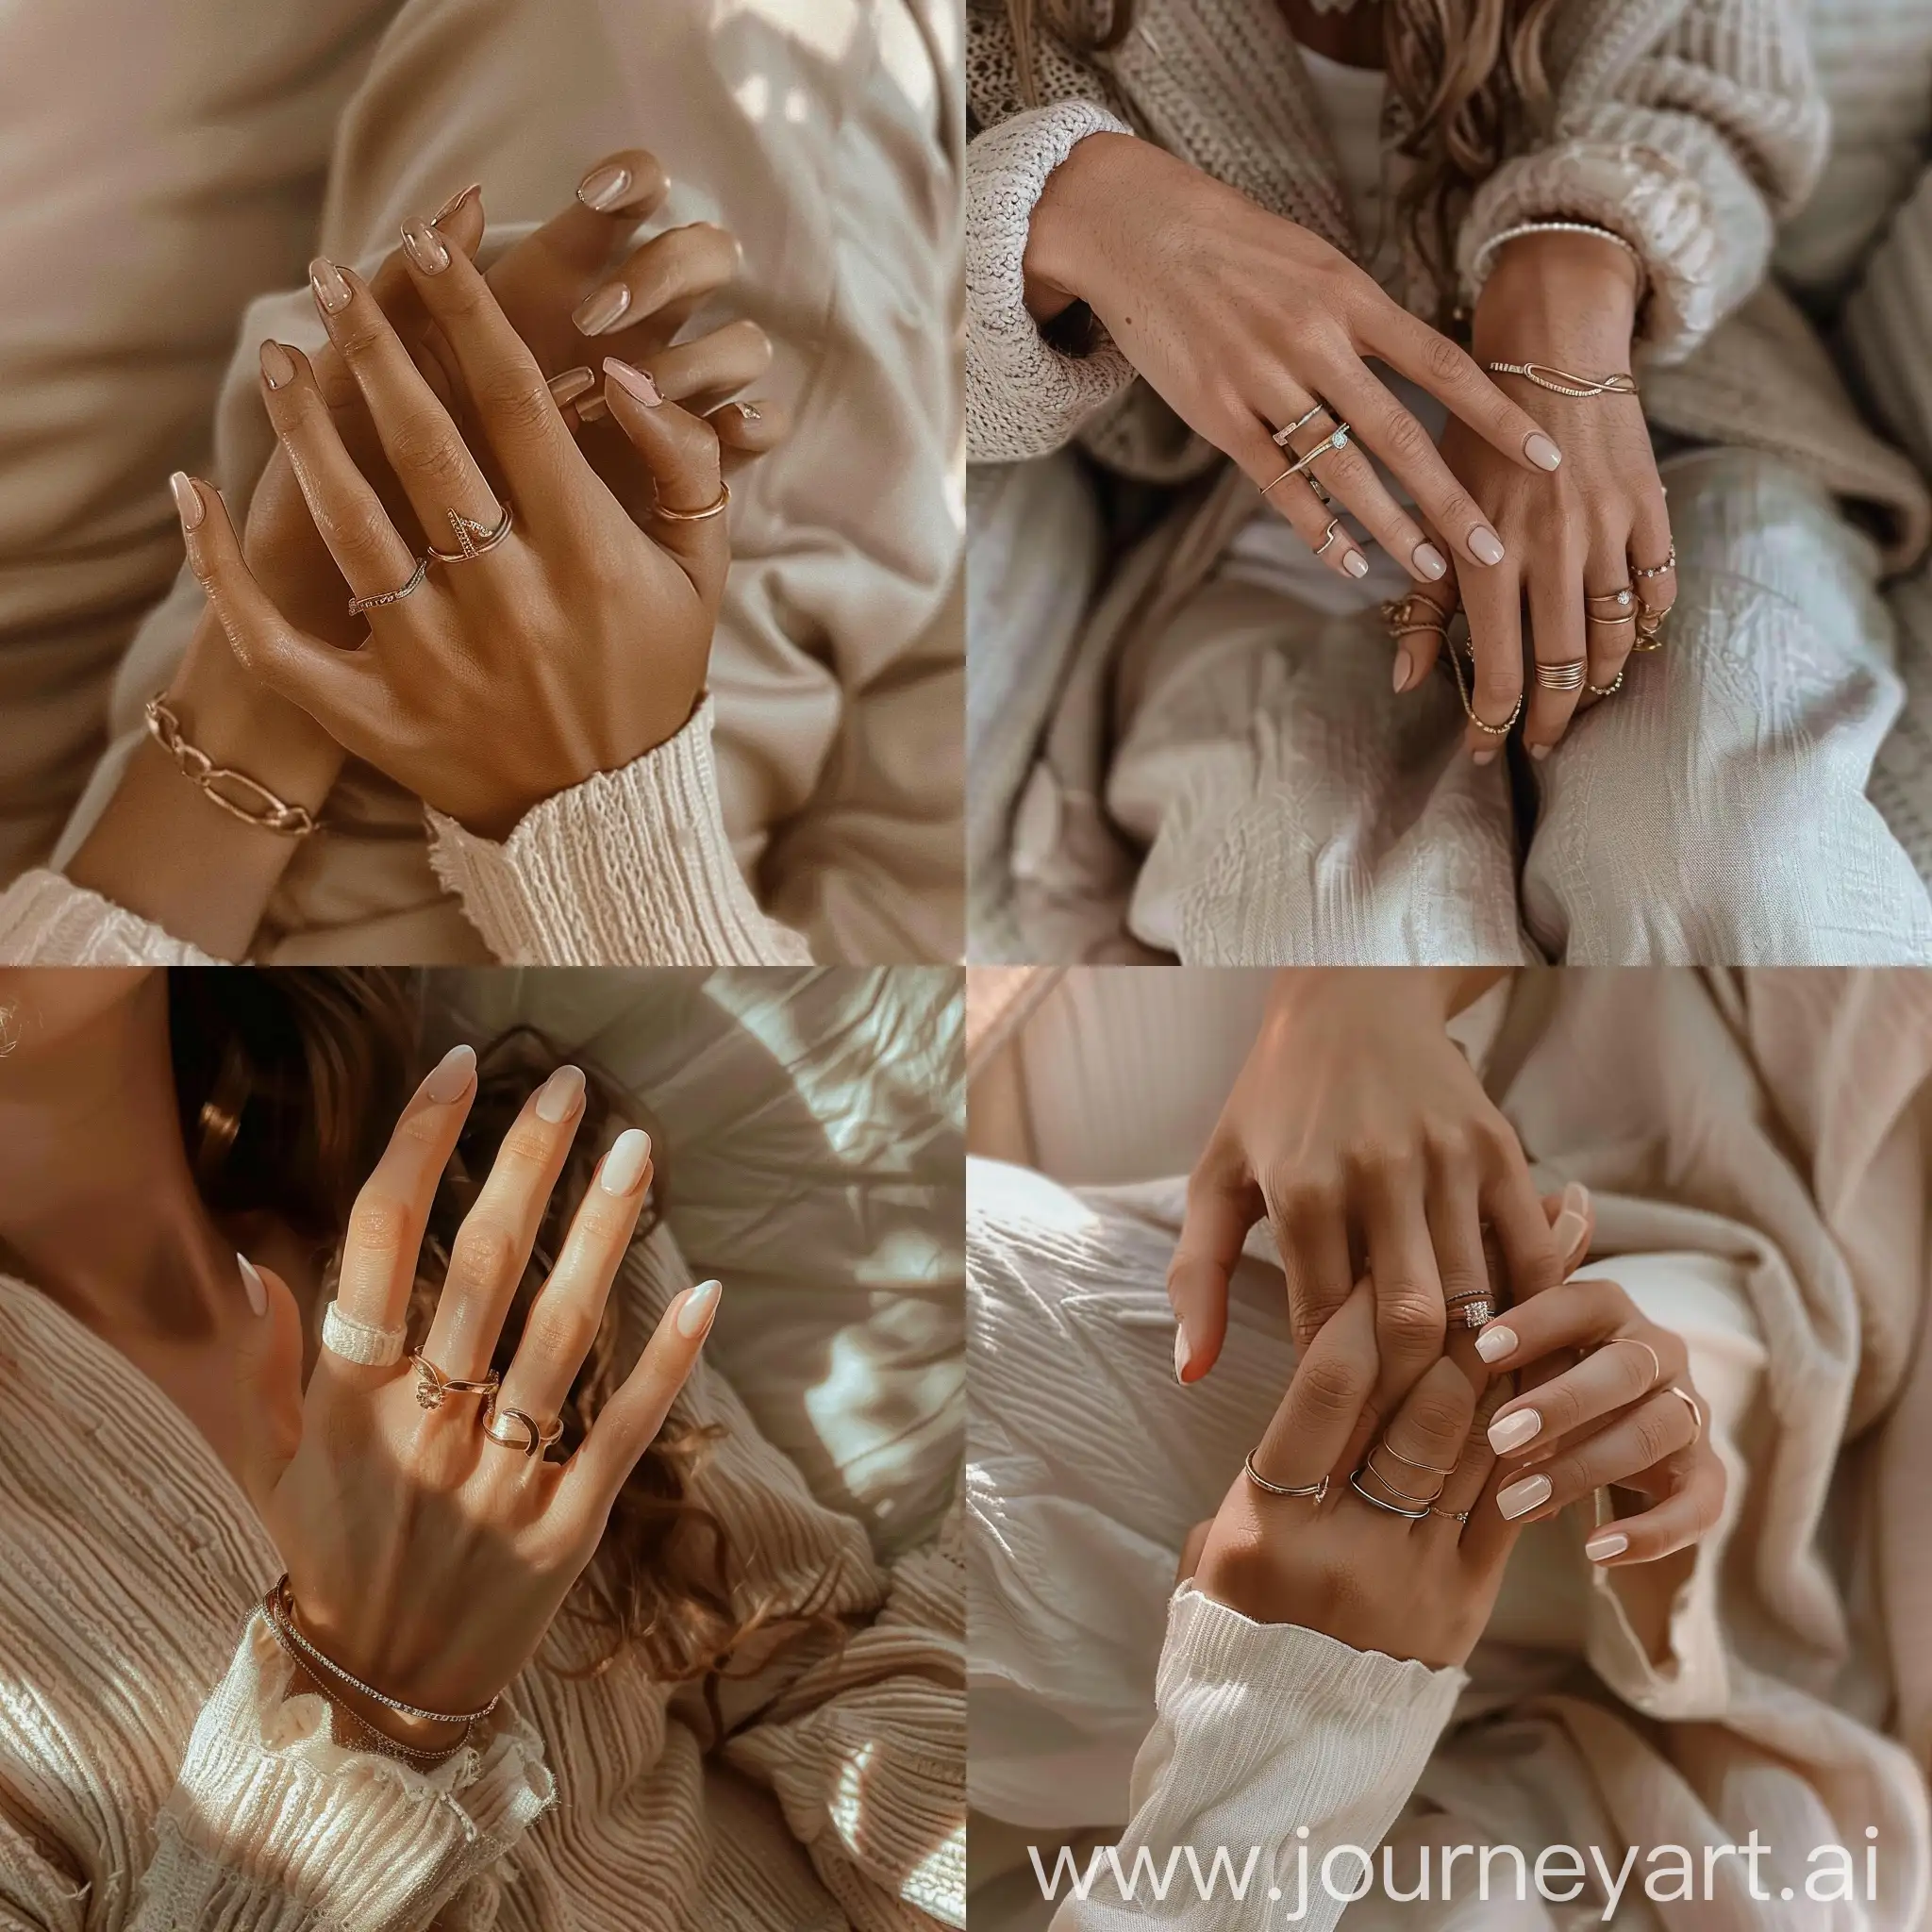 Aesthetic Instagram photo of a woman's hands 